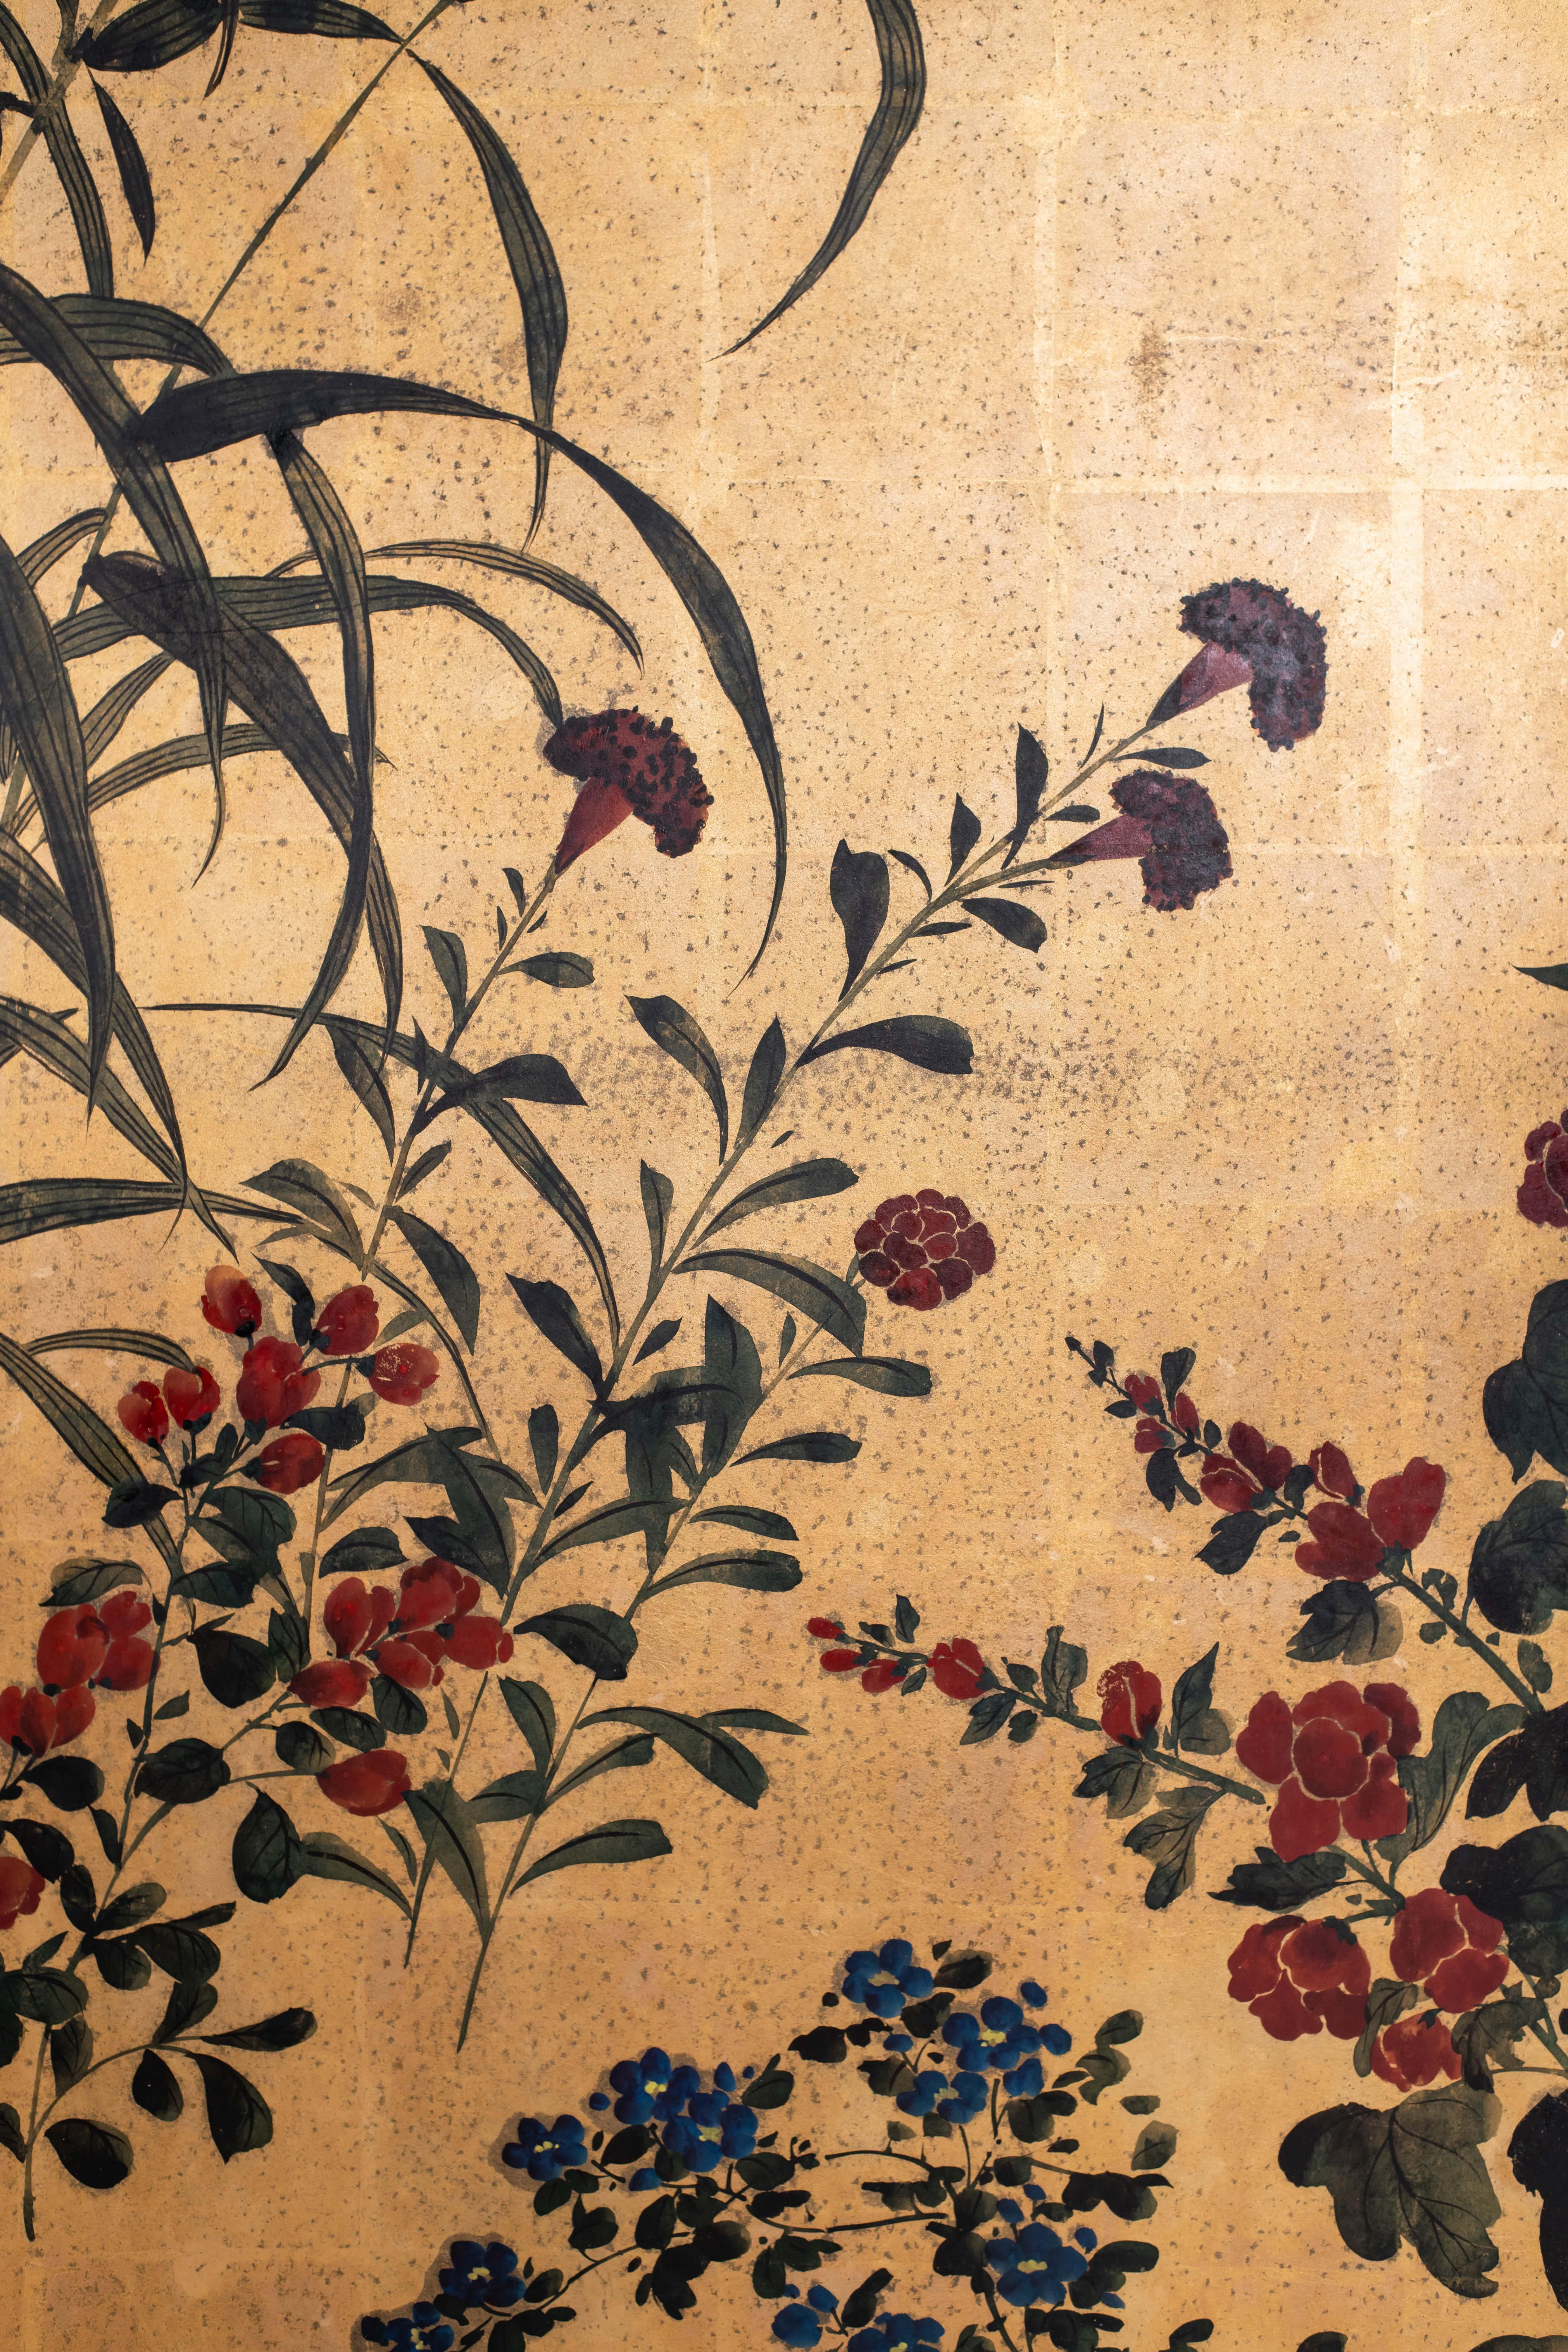 Hand-Painted Hand Painted Japanese Folding Screen Byobu of Flowering Grasses and Bamboo For Sale